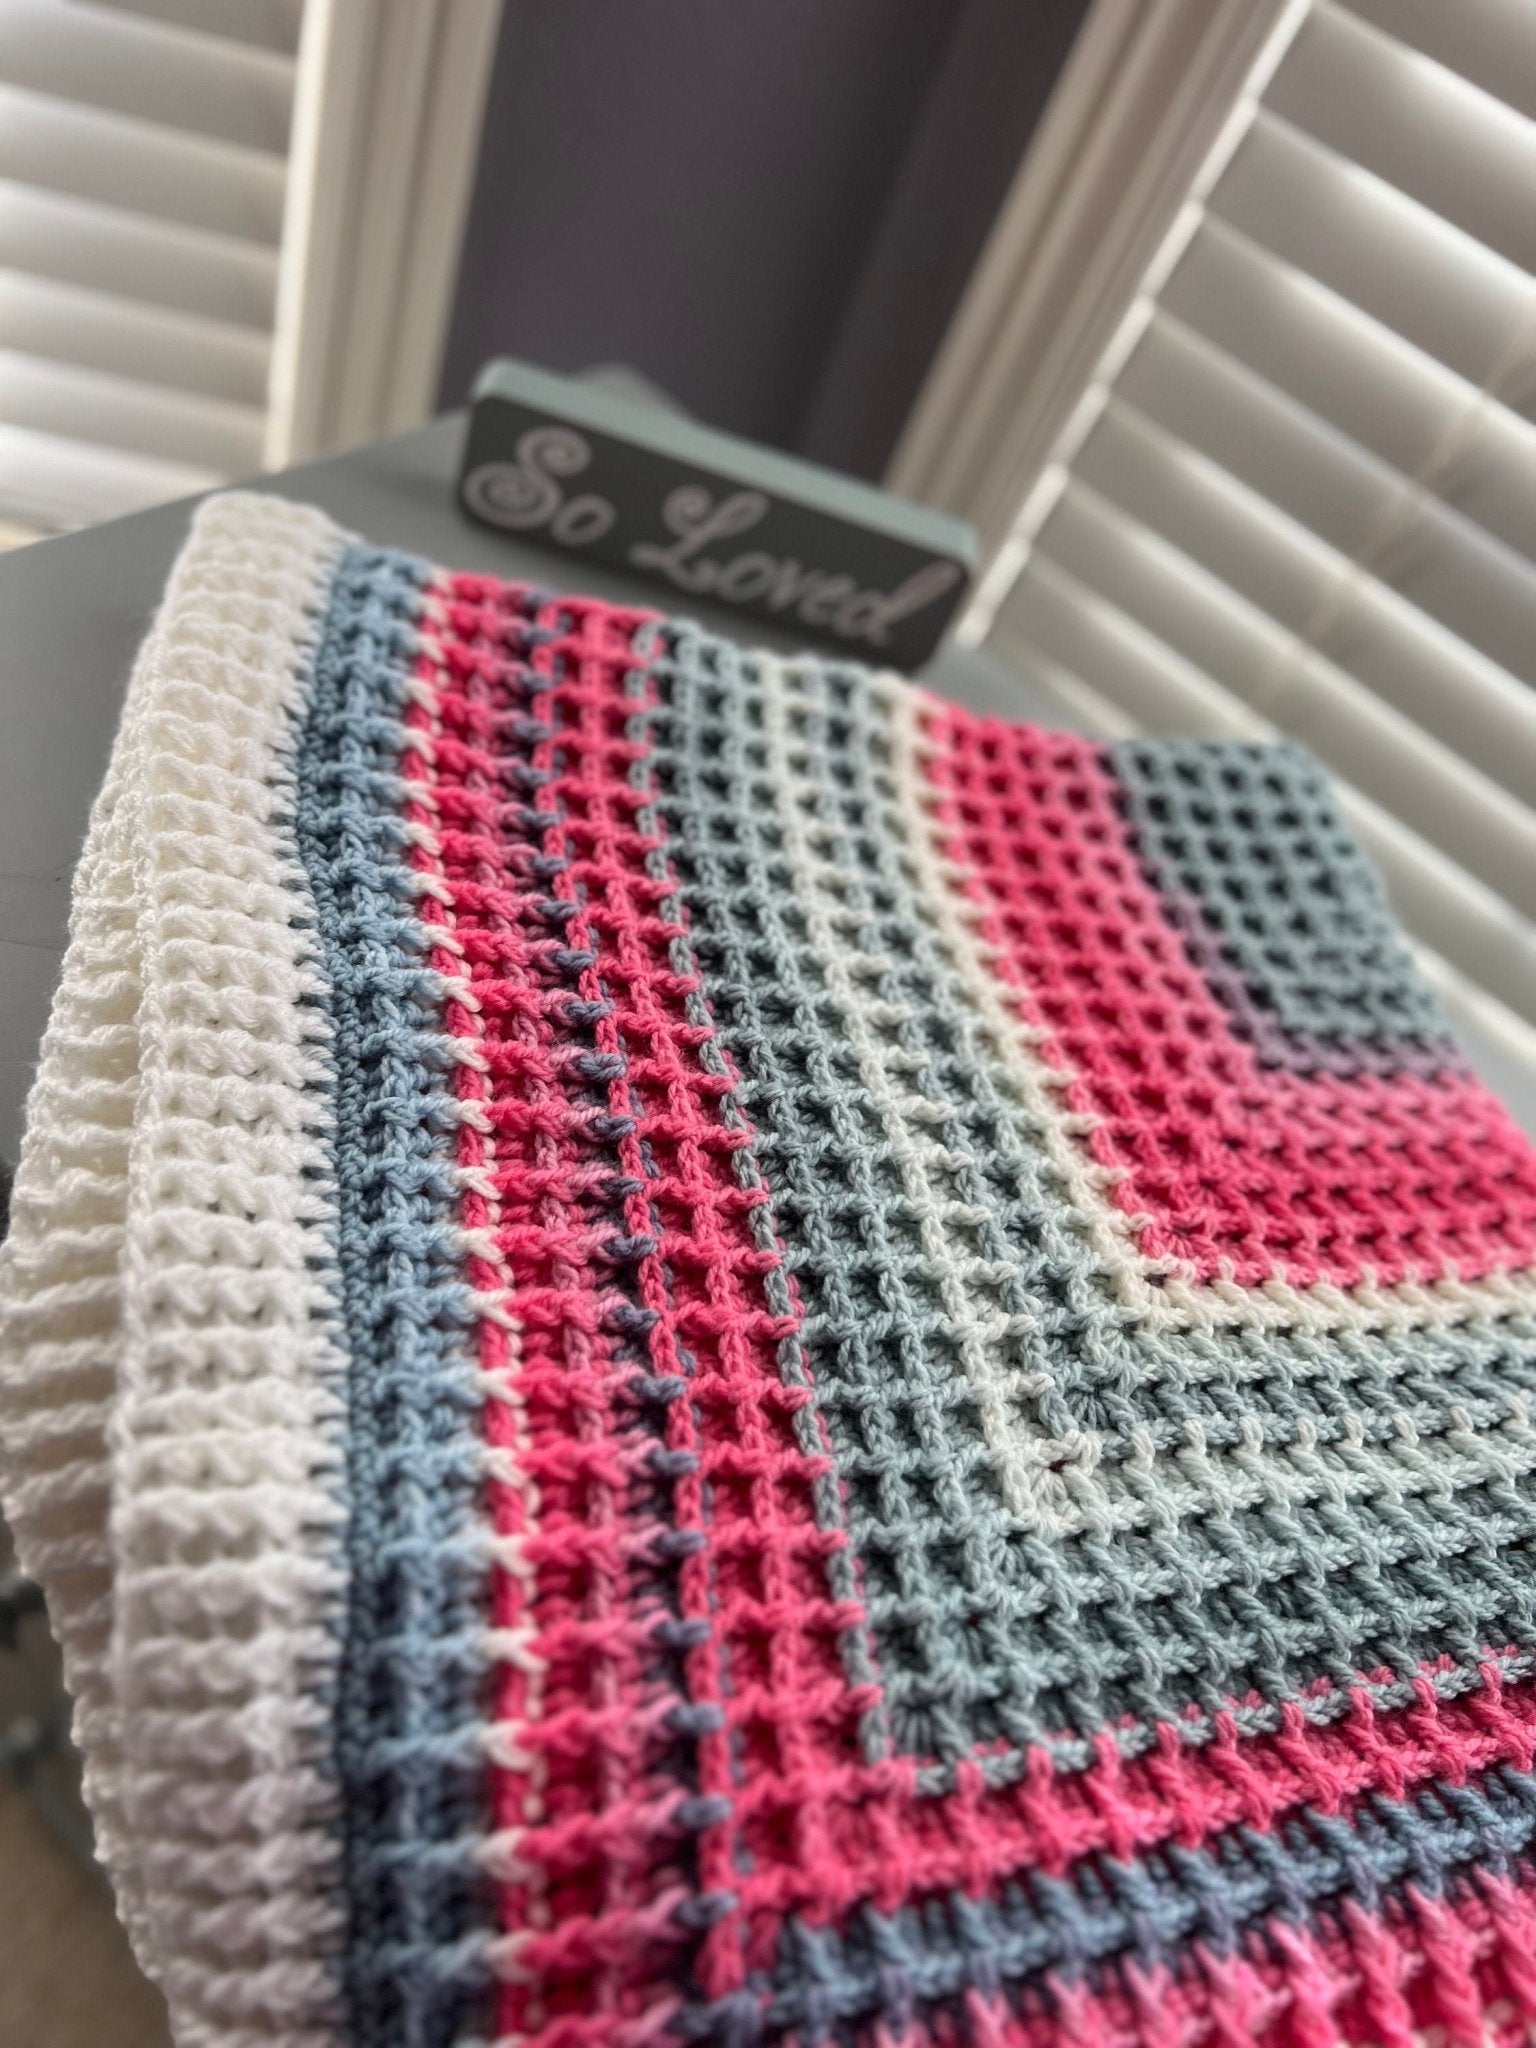 Blanket for baby girl handmade crochet. Pink, white, and gray colors. Baby shower gift, first birthday gift. - Lilly Grace Sparkle Boutique